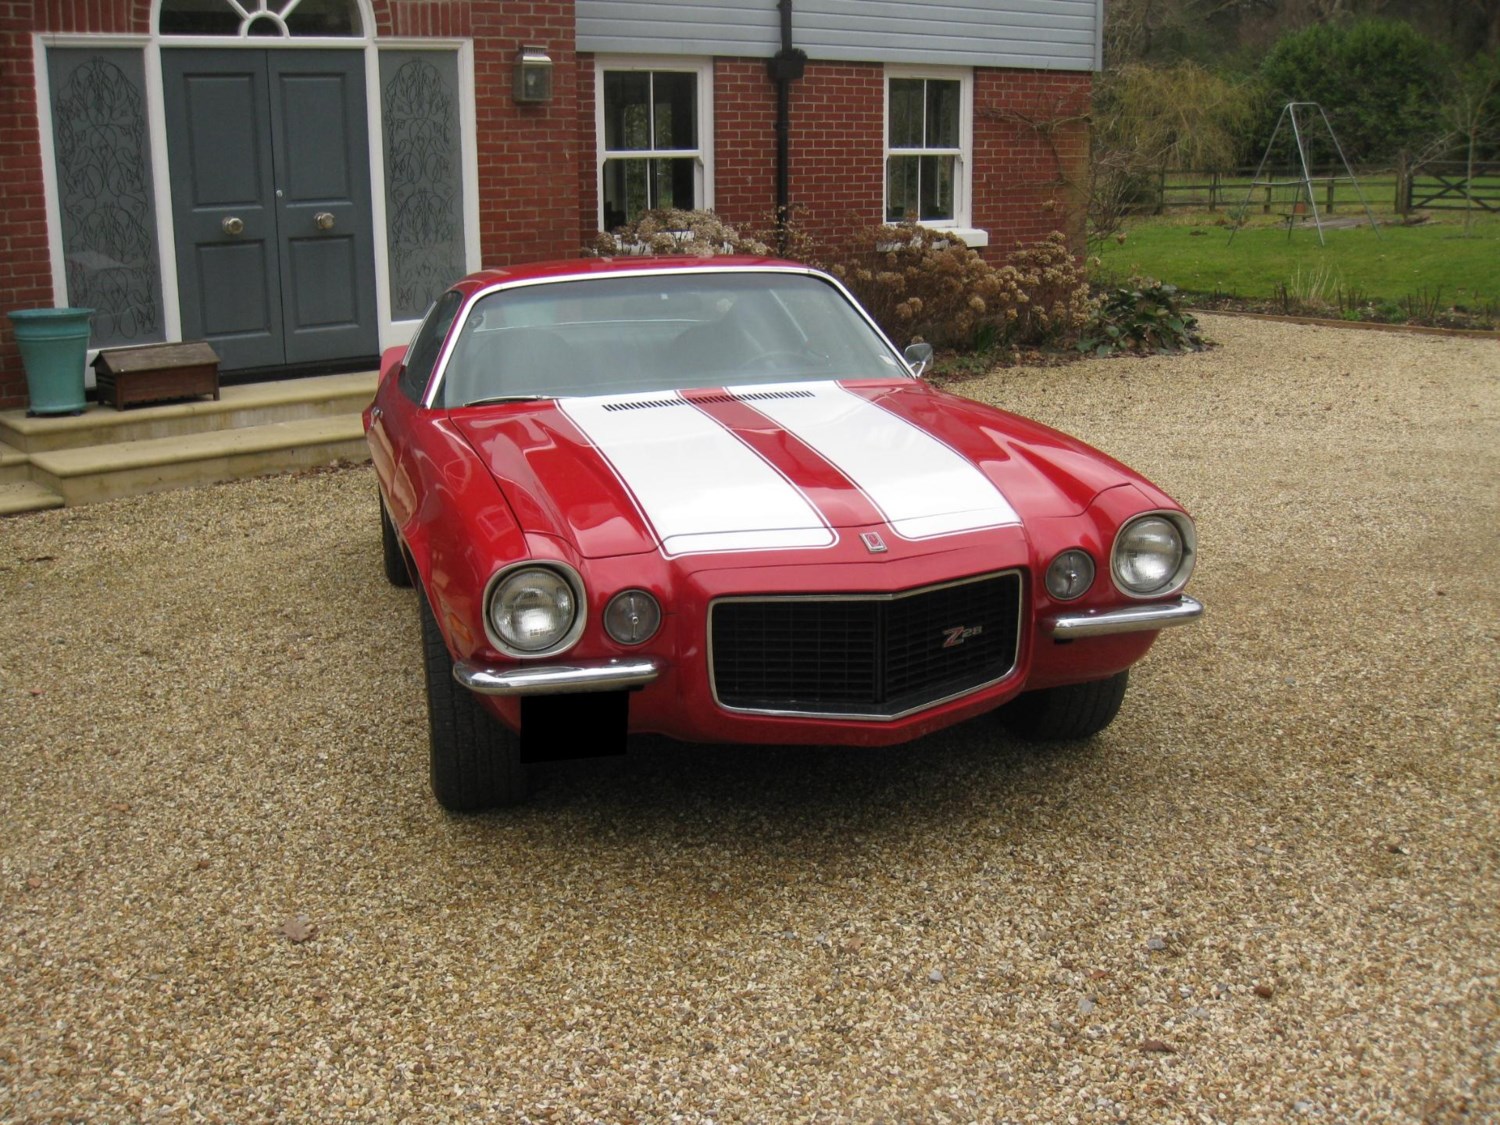  Chevrolet Camaro RS For Sale In Call Today, Wiltshire